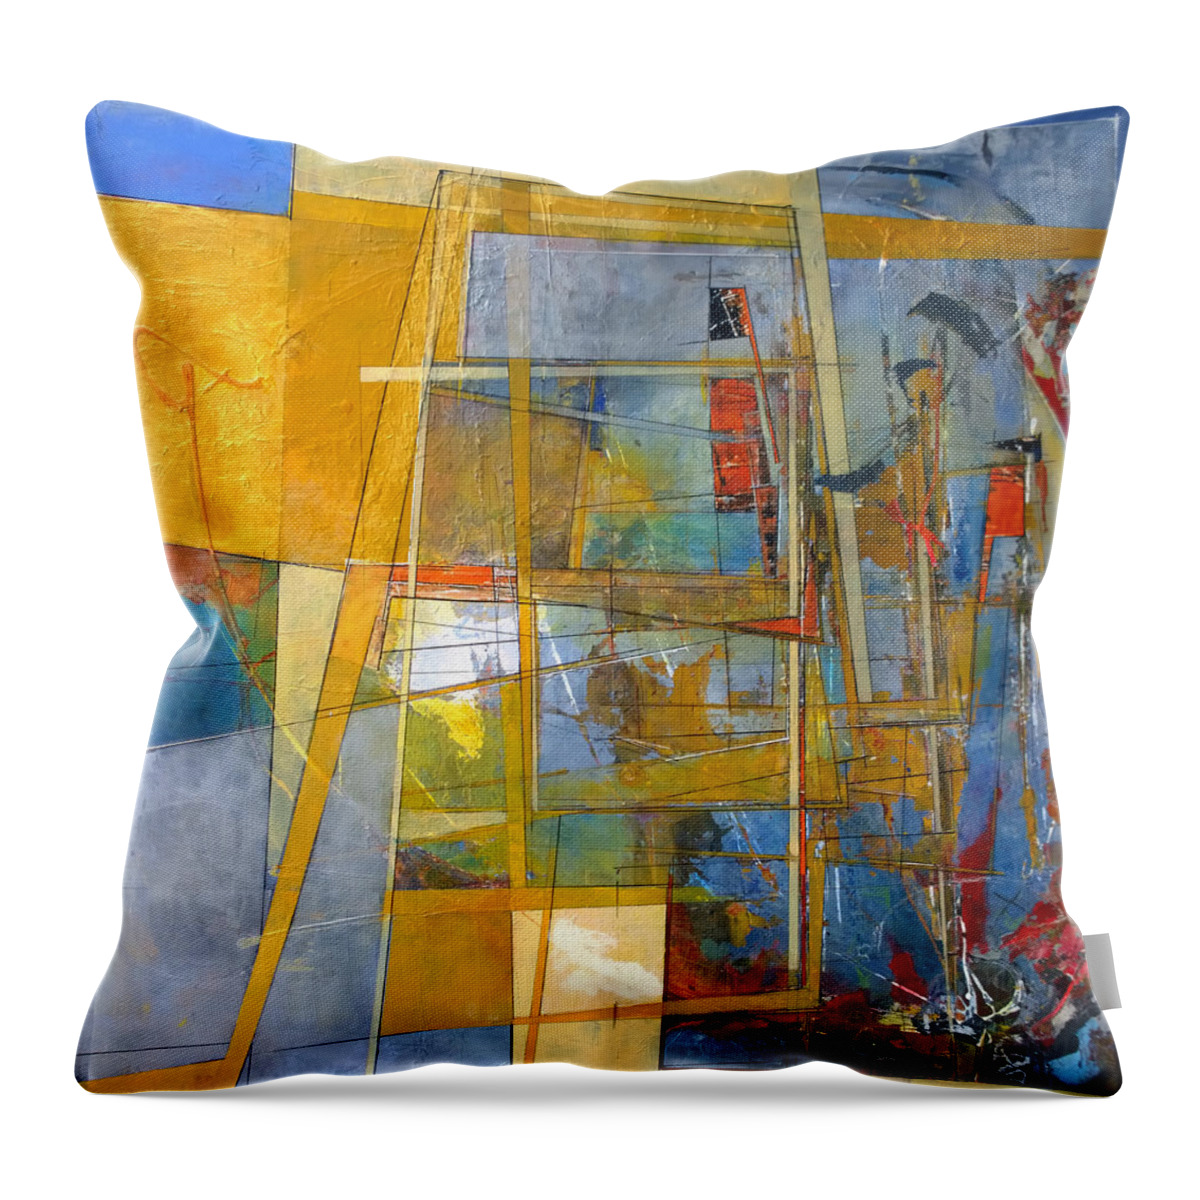 Abstract Geometric Drafted Expressionism Action Urban Figures Robert Anderson Wilmington North Carolina Architectural Throw Pillow featuring the painting Abstract #38 by Robert Anderson